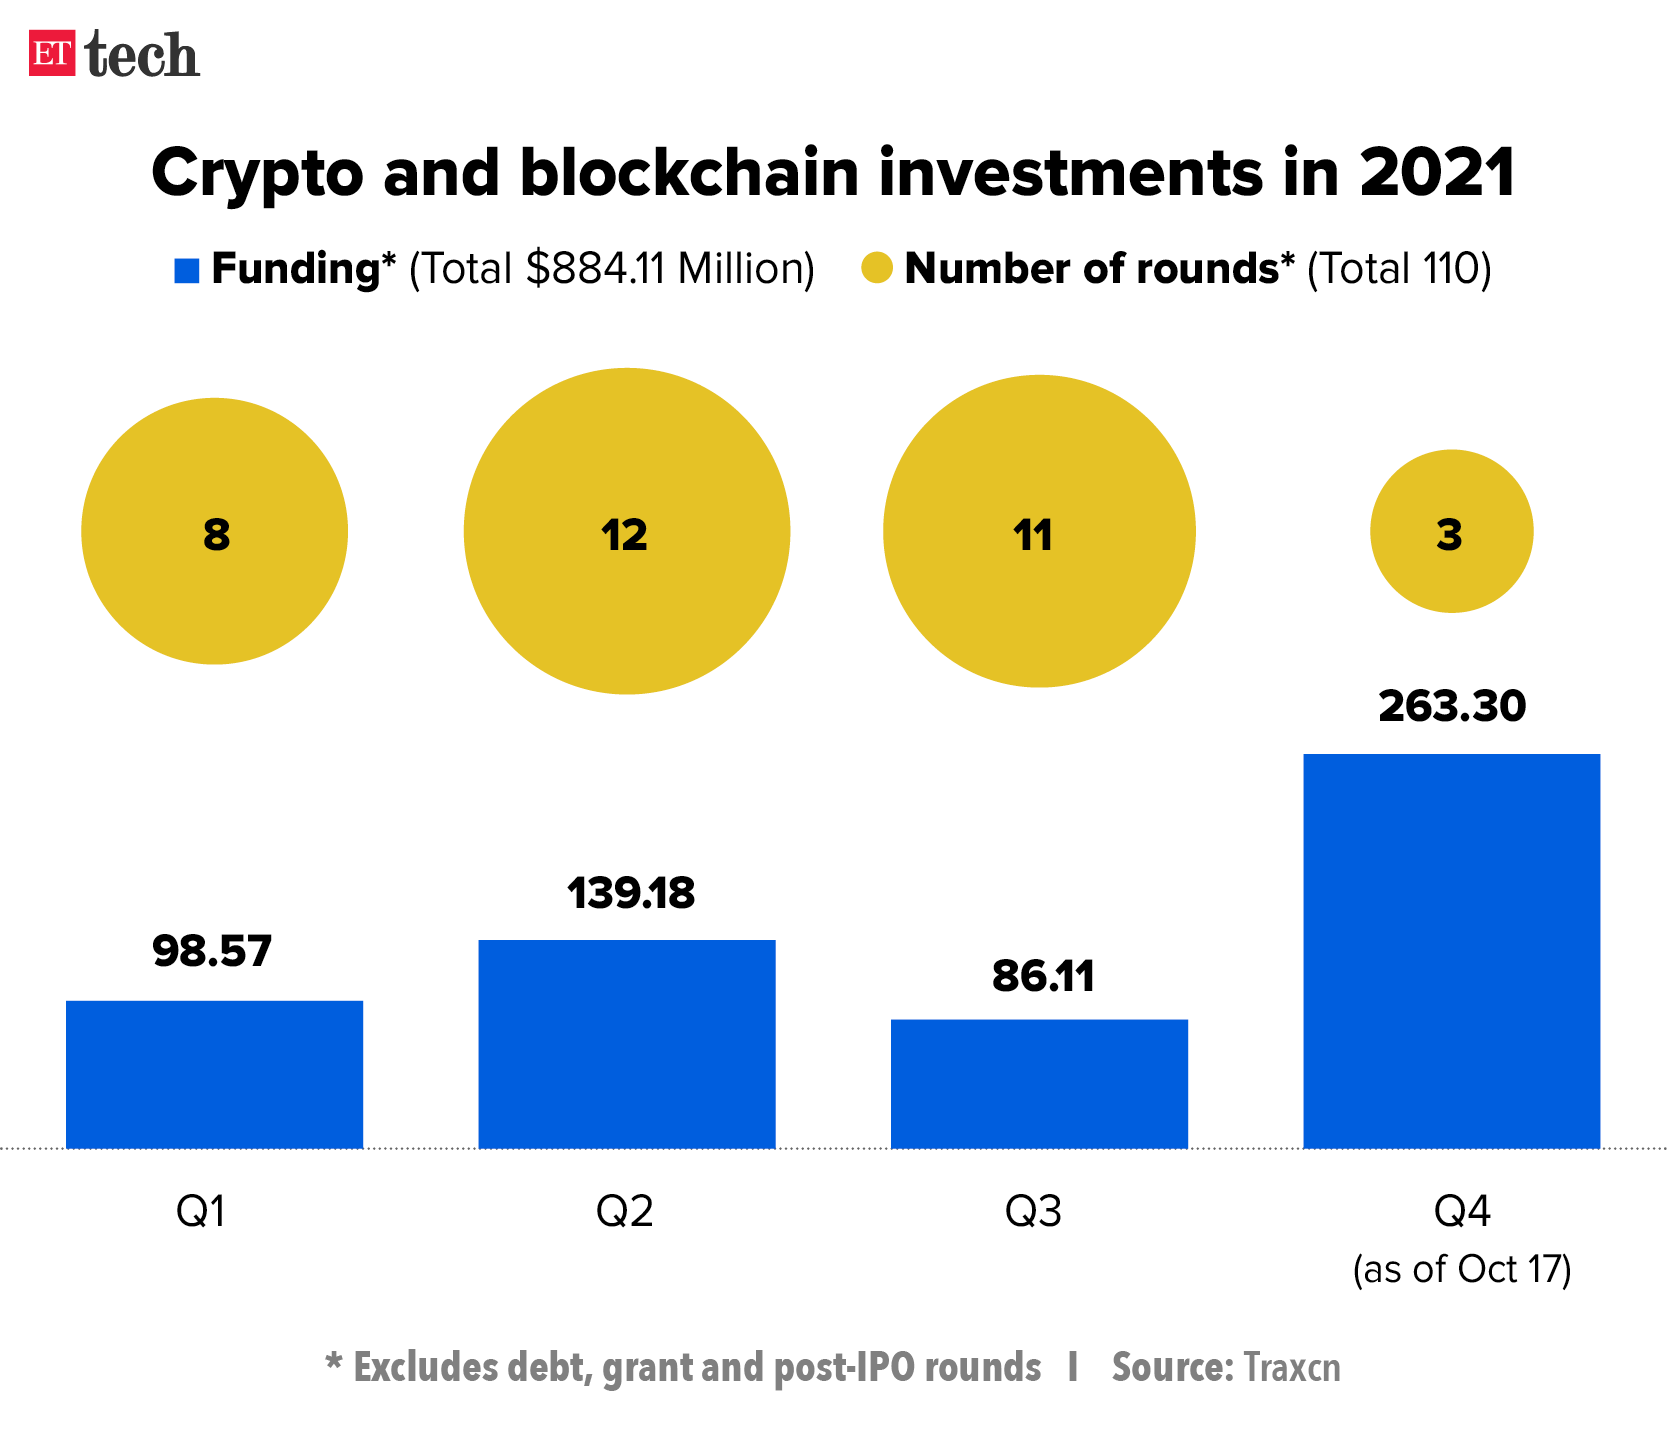 Crypto and blockchain investments in 2021